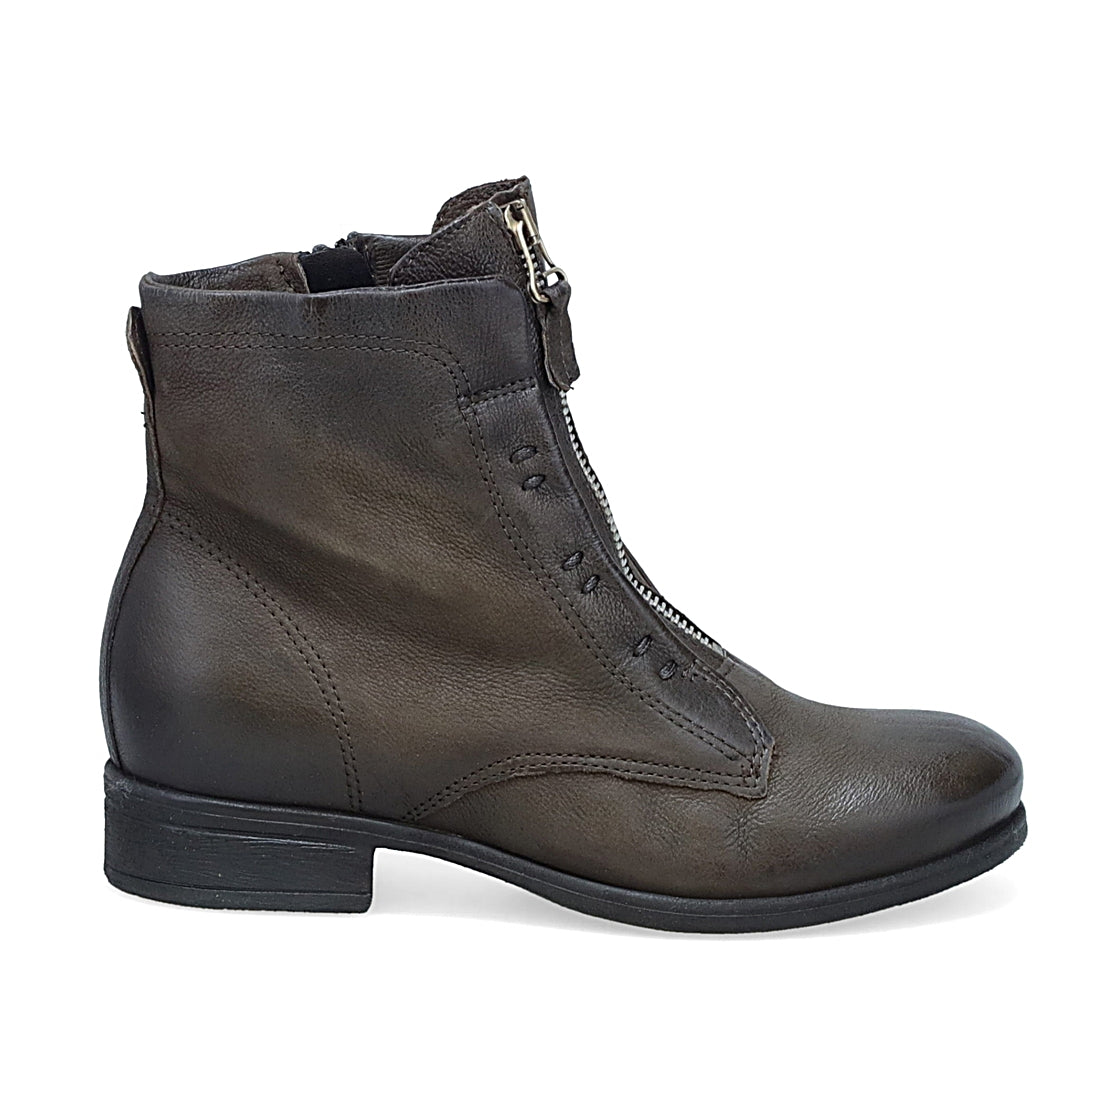 Outer side view of the miz mooz story ash ankle boot. This boot is grey with a slightly raised heel, a front zipper, and stitched detailing.